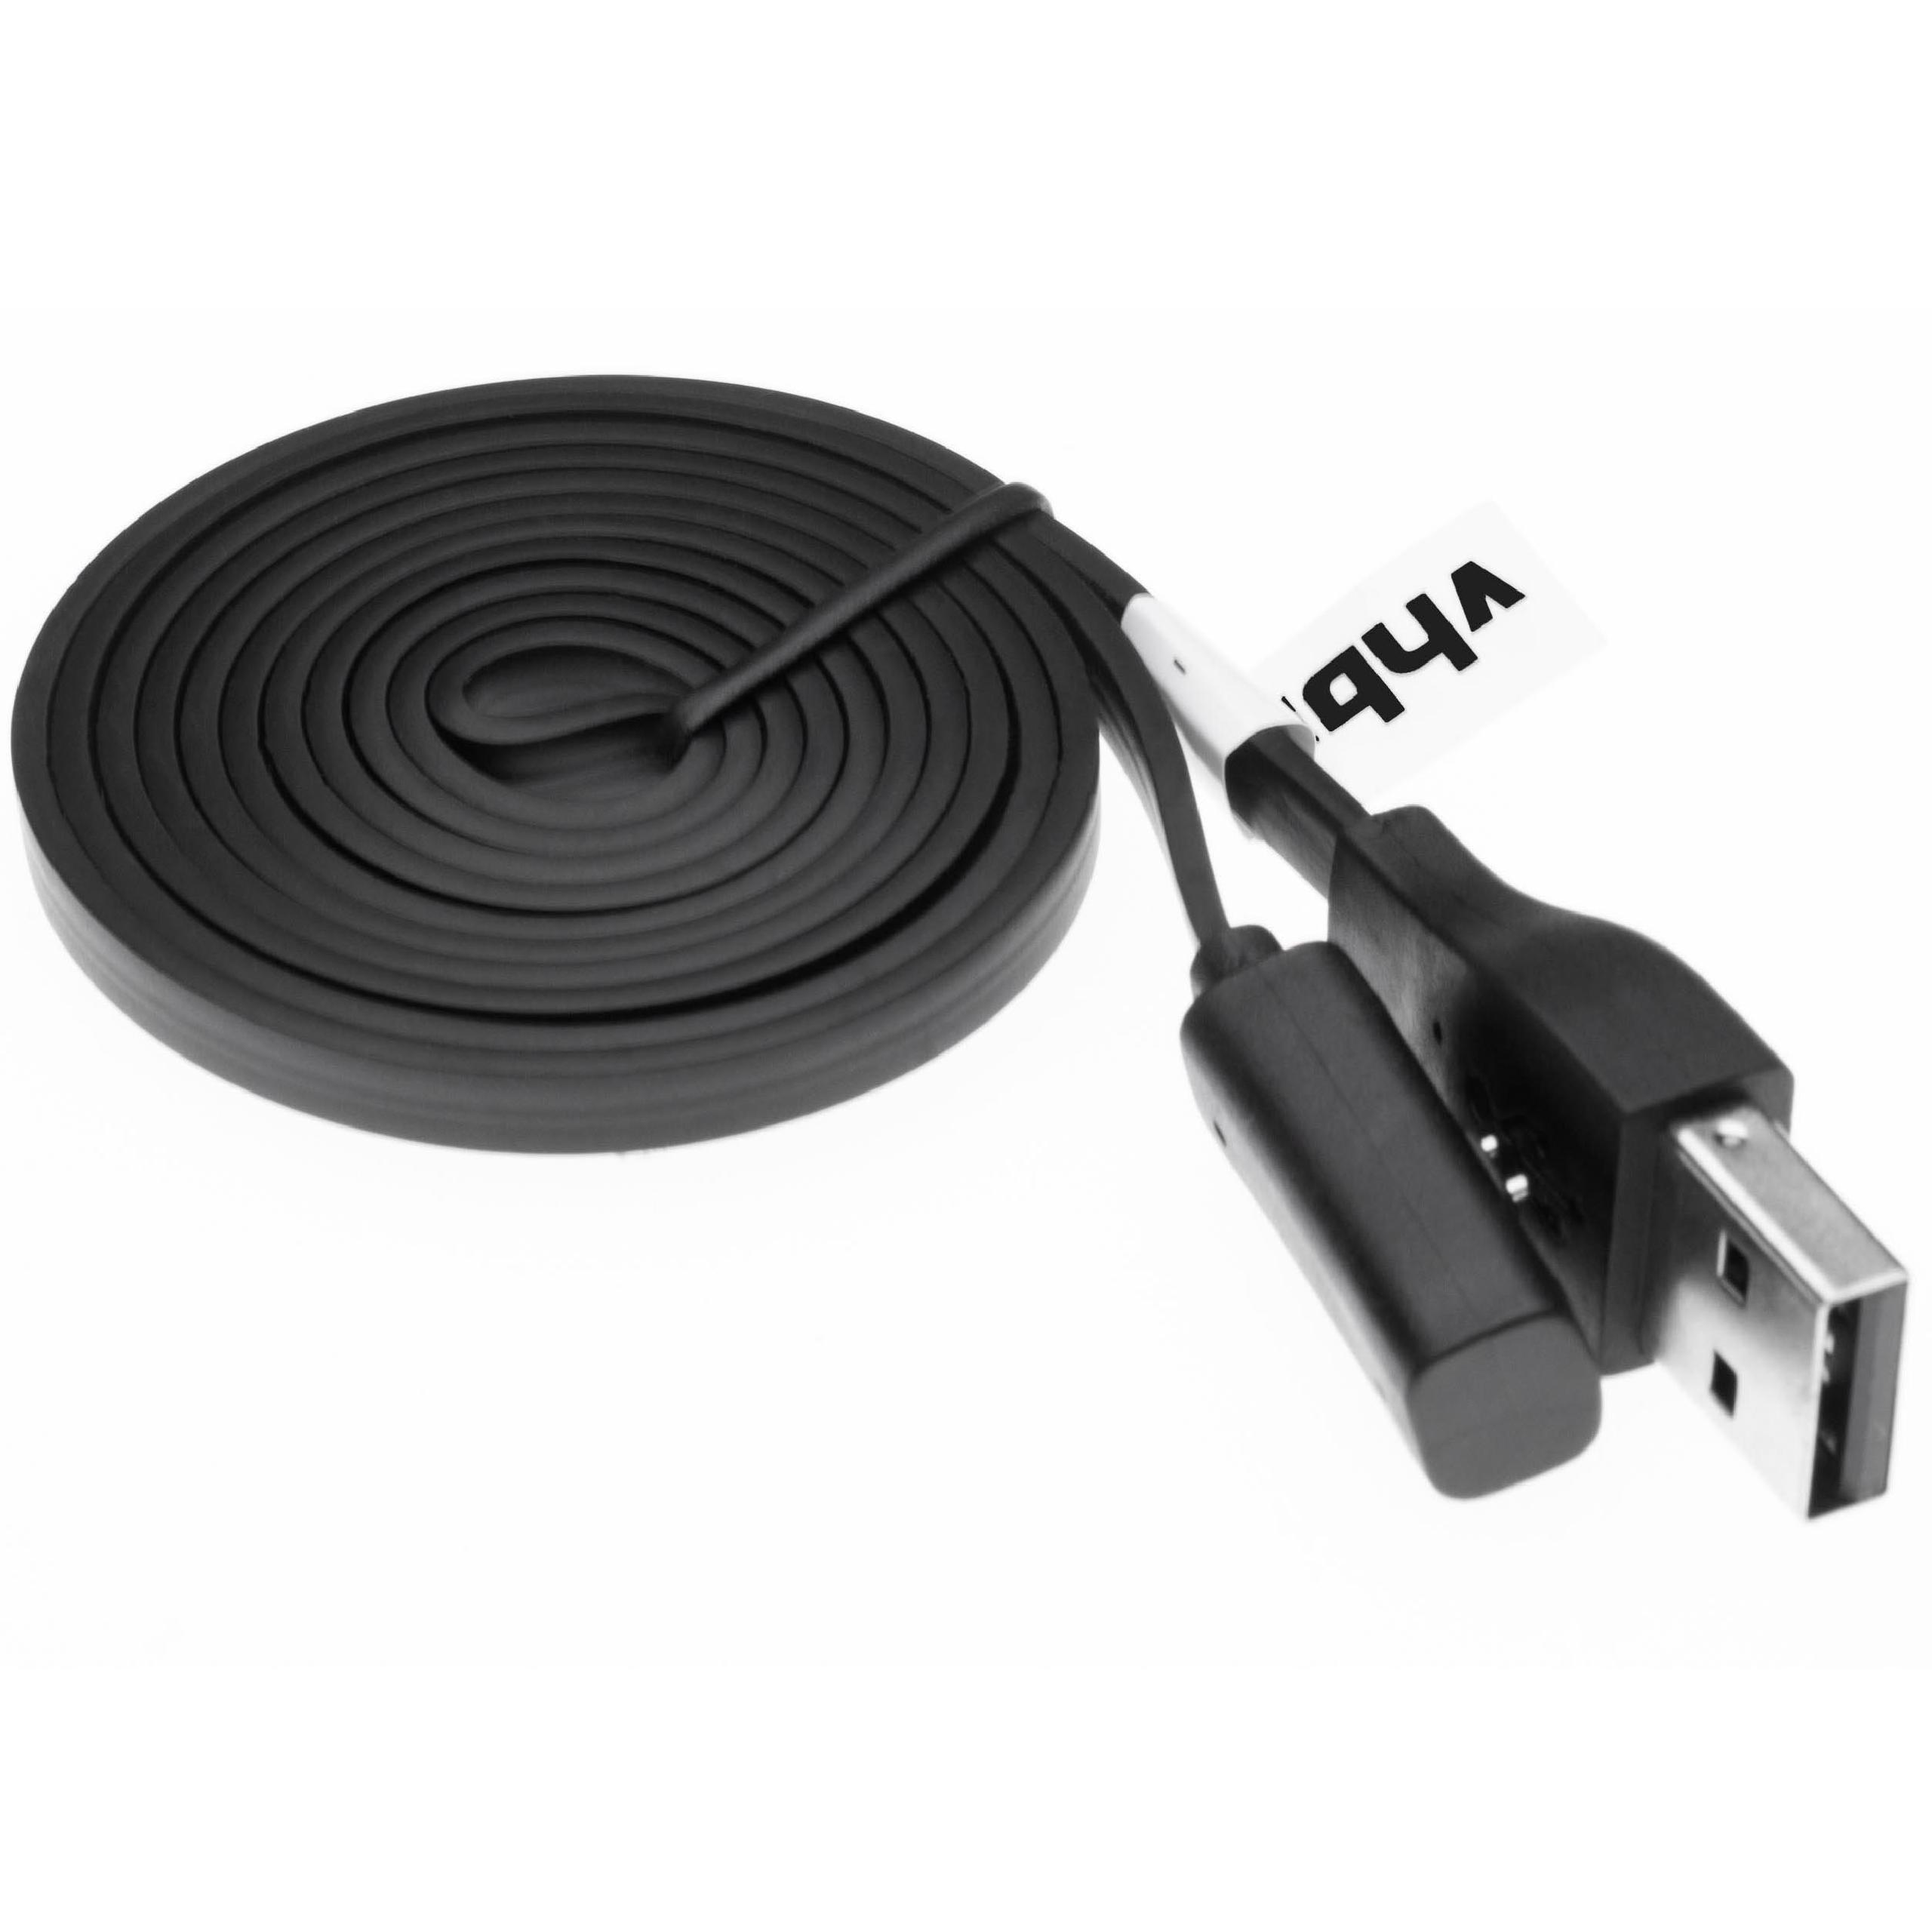 Charging Cable suitable for Pebble Time Fitness Tracker - Cable, 100cm, black